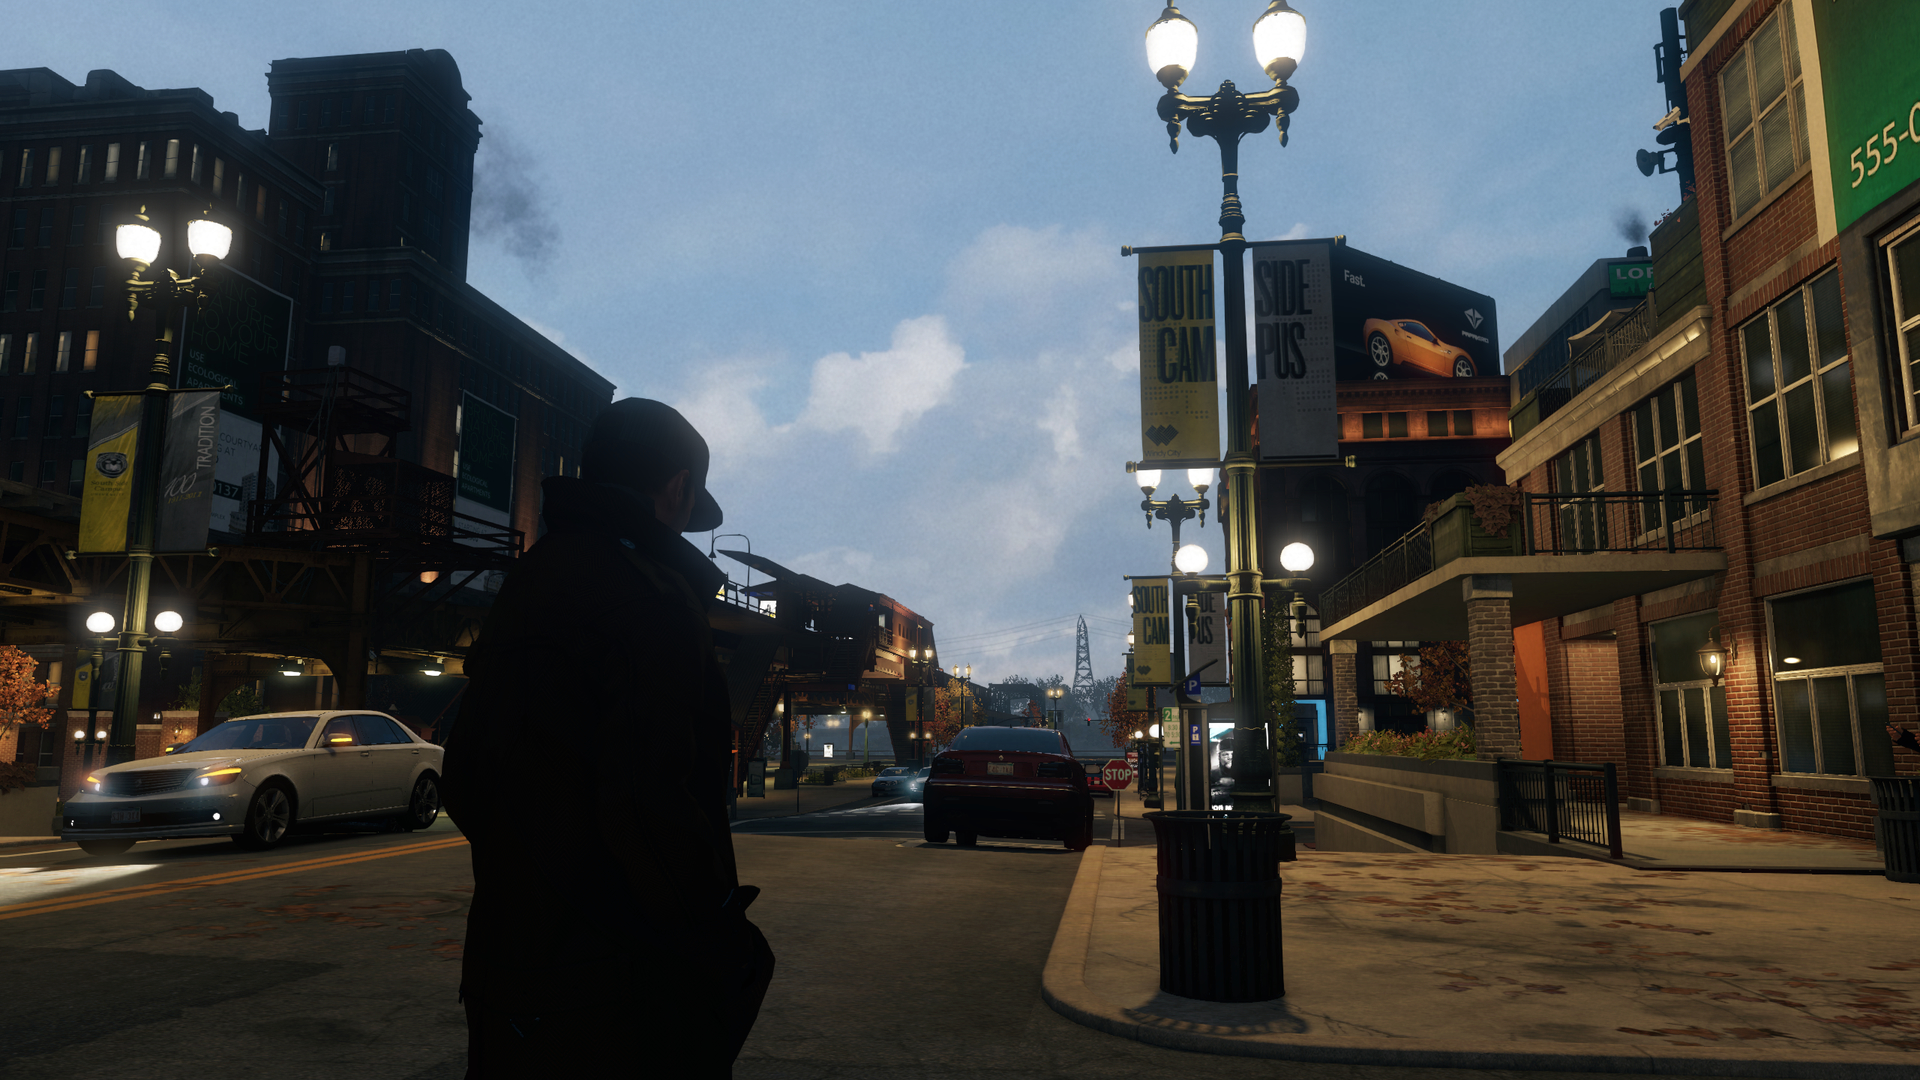 watch_dogs_exe_dx11_20140528_175153_1080p_by_confidence_man-d7k3df4.jpg